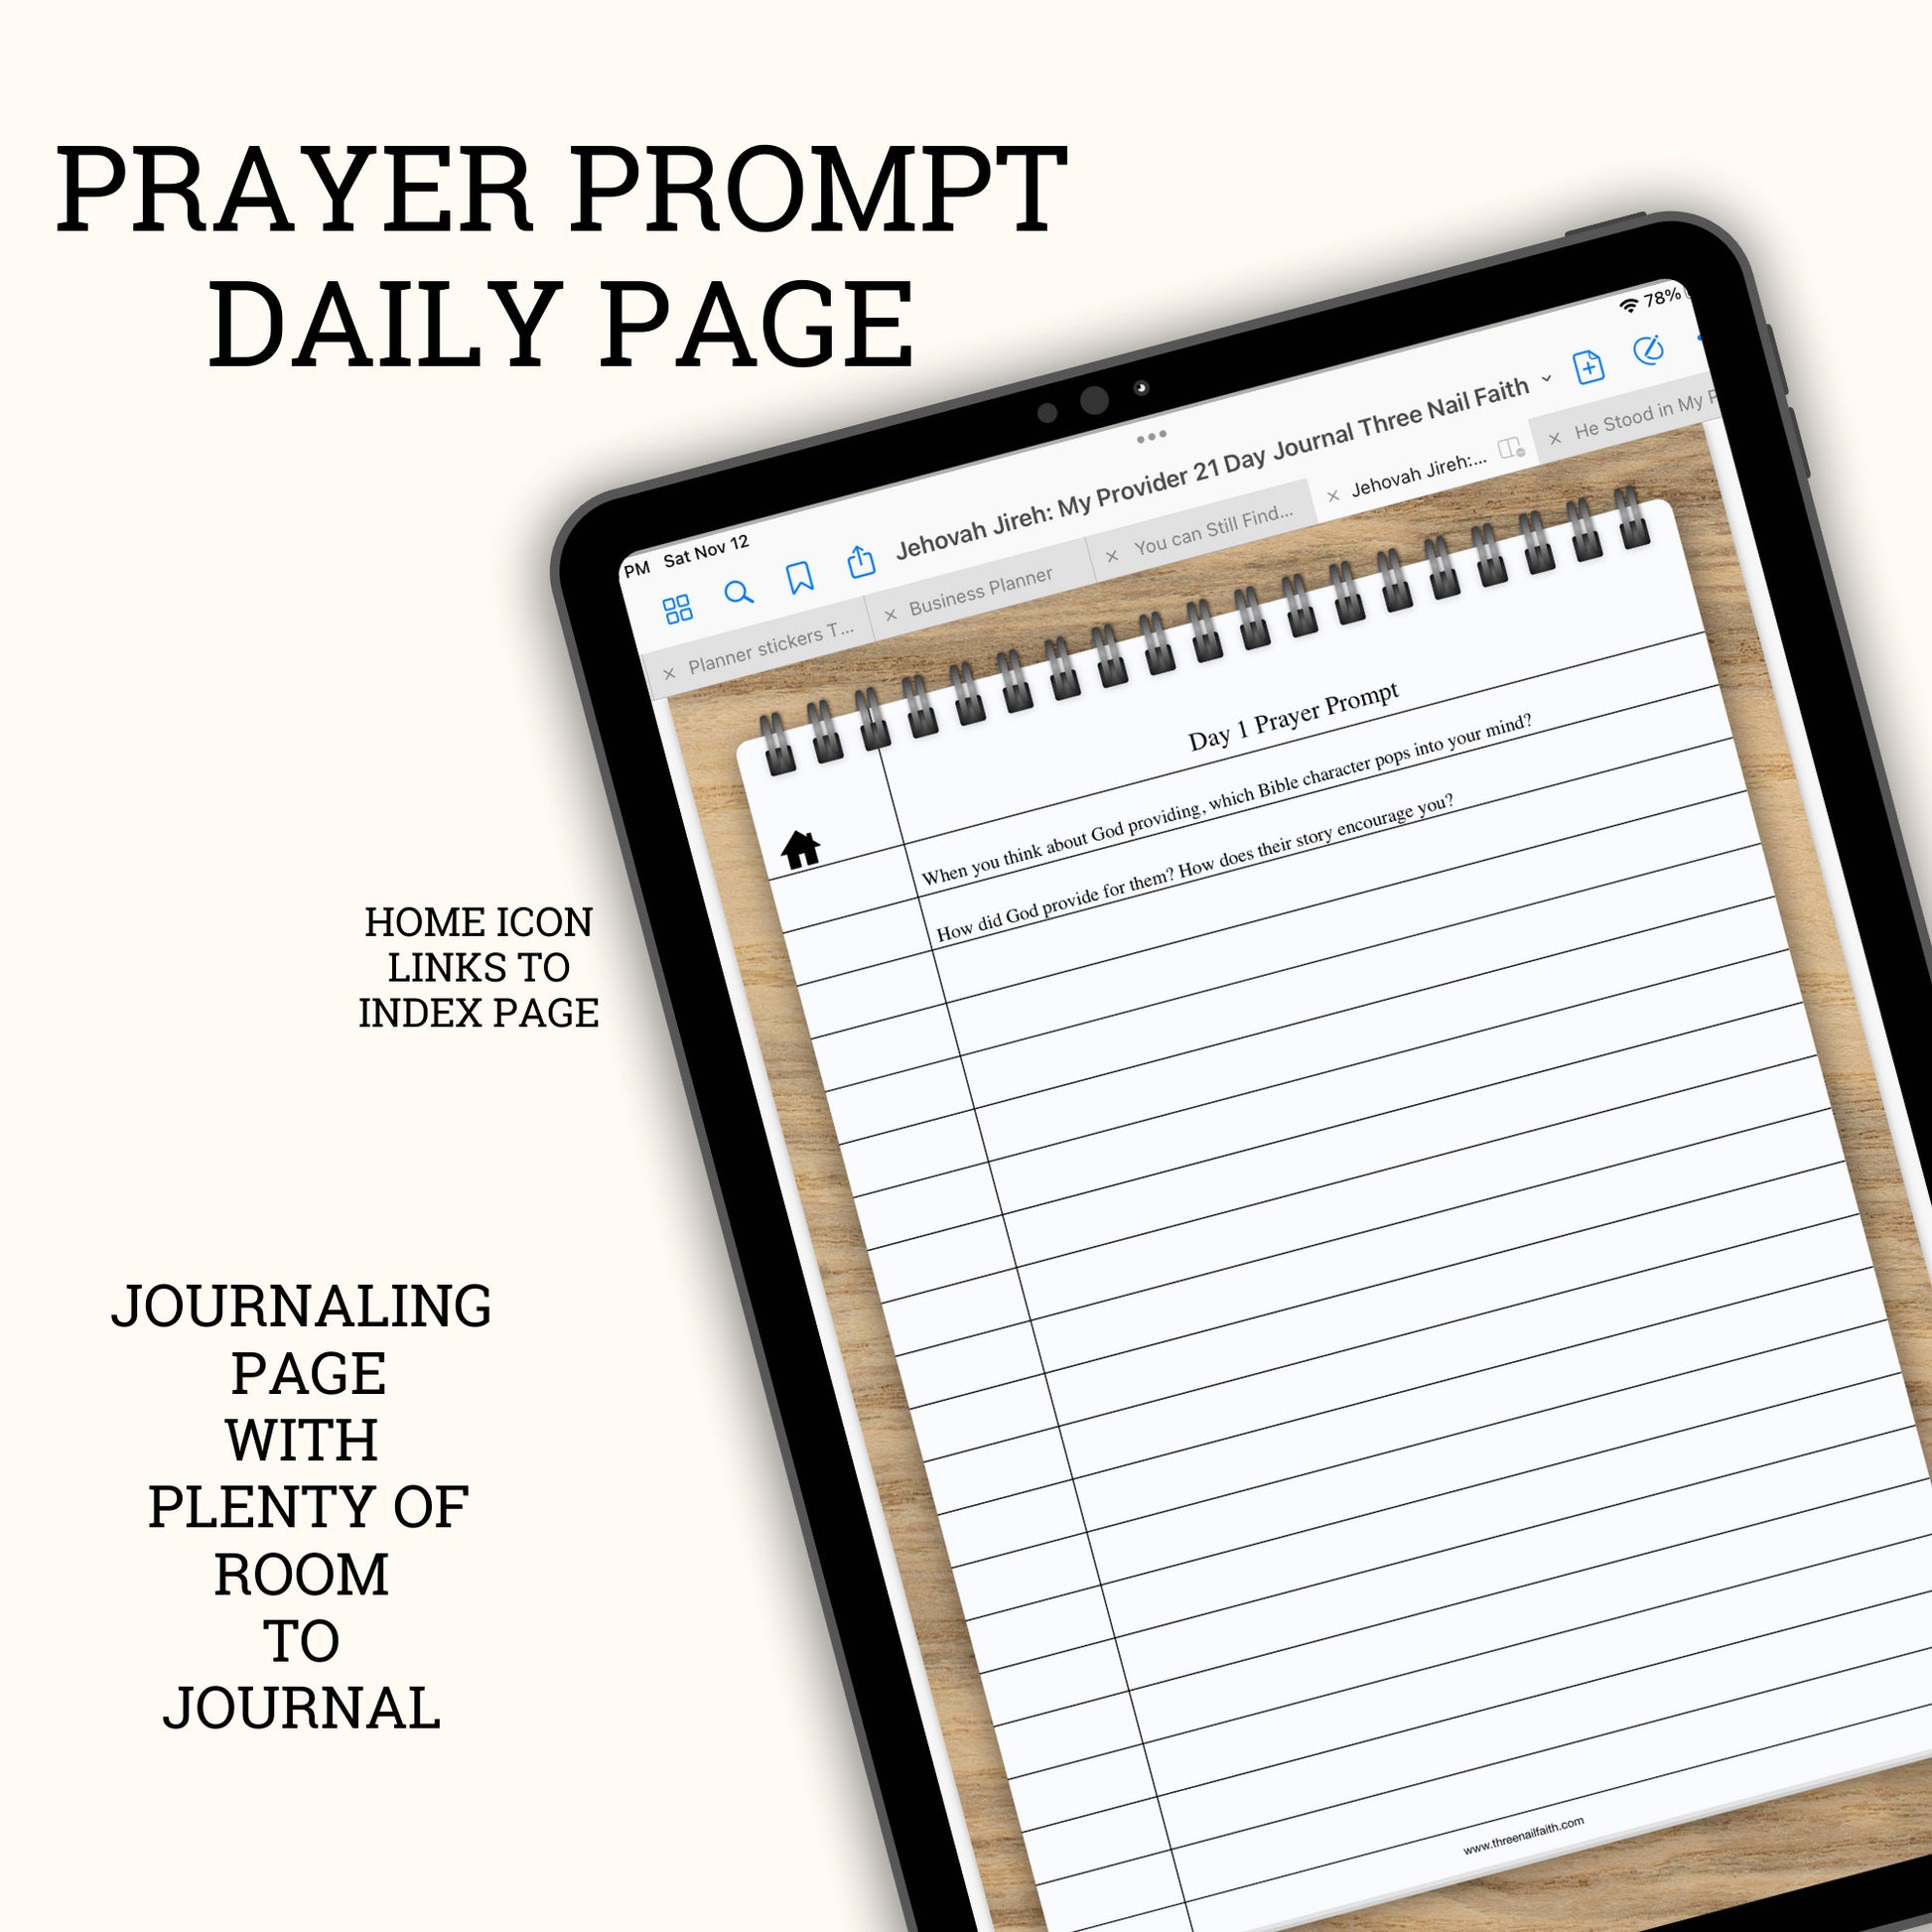 21-Day Journal and Prayer Prompts Digital Journal, Jehovah Jireh: My Provider Prayer prompt daily page